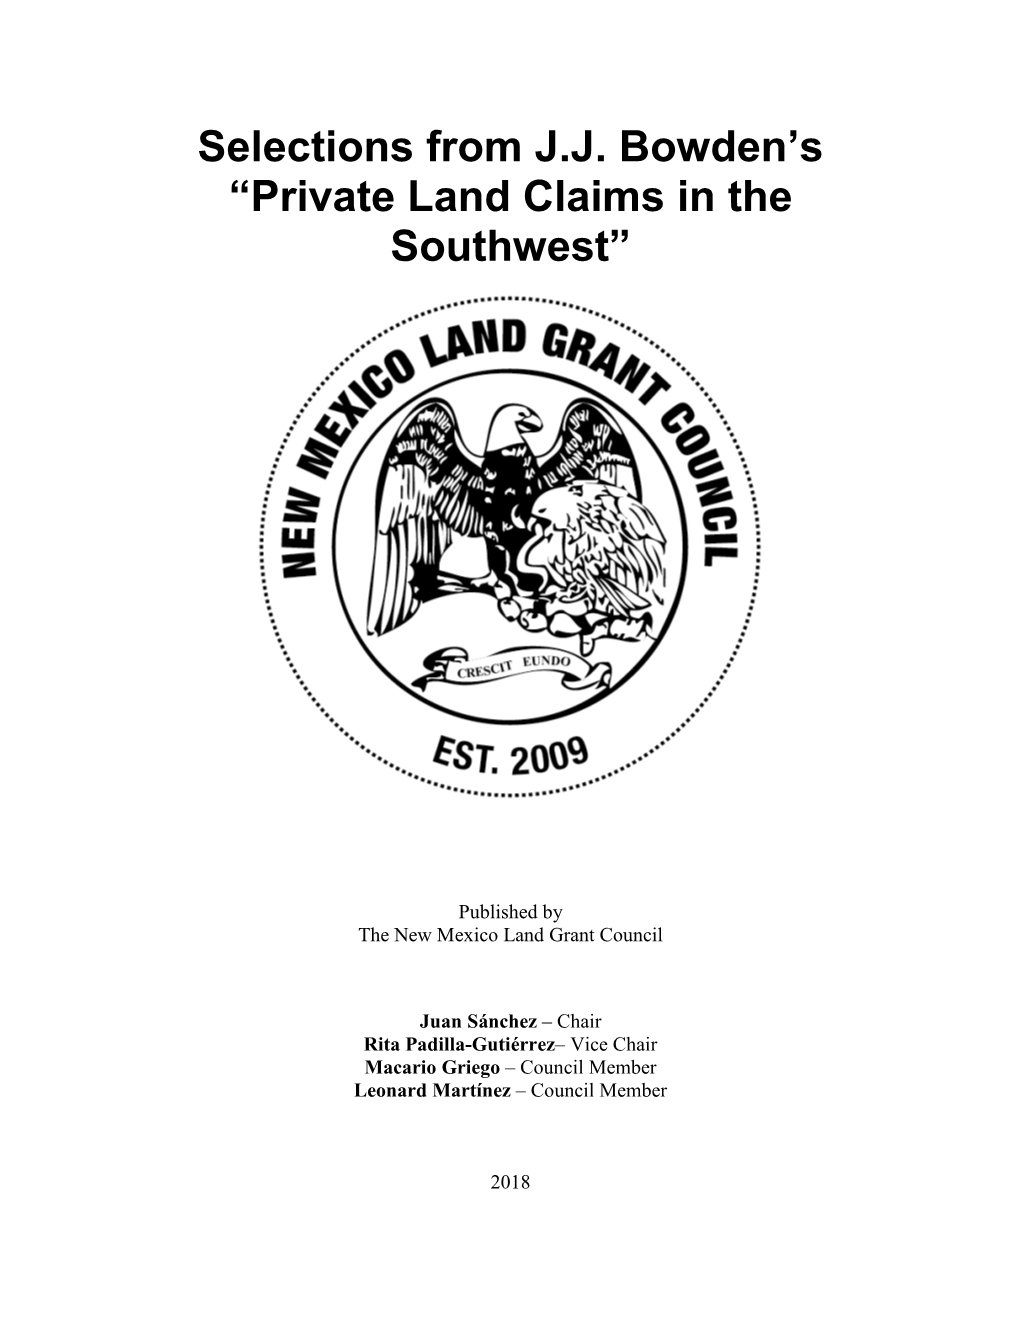 Selections from J.J. Bowden's “Private Land Claims in the Southwest”